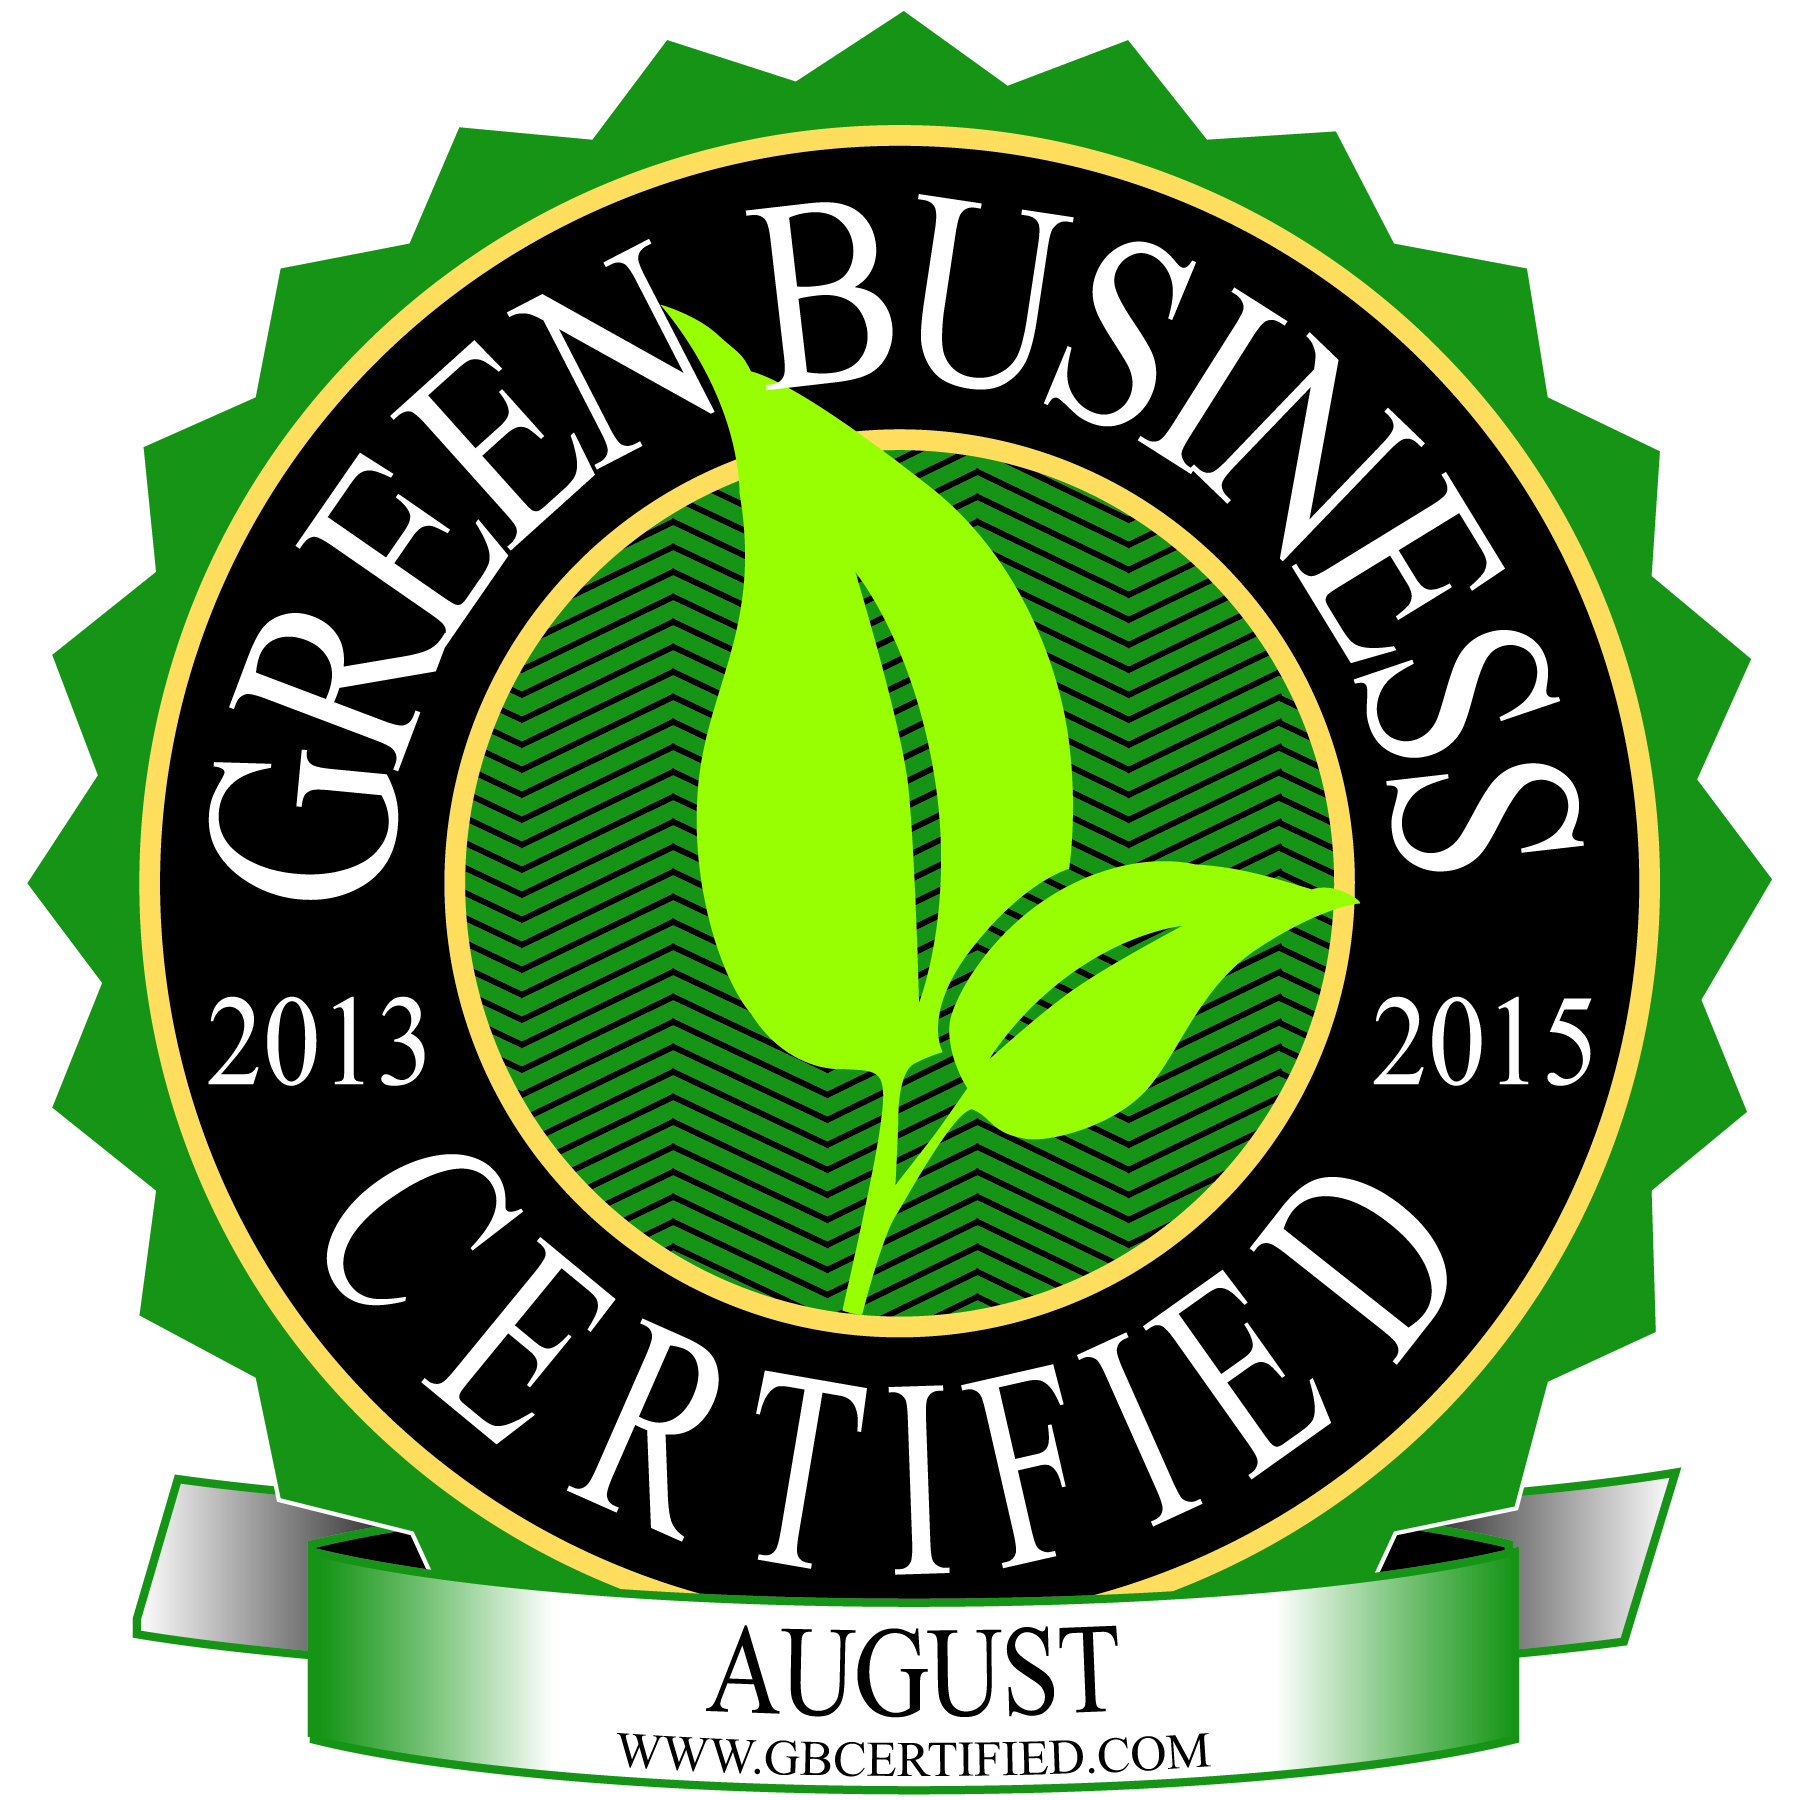 Green Seal awarded to Green60.com payroll service.